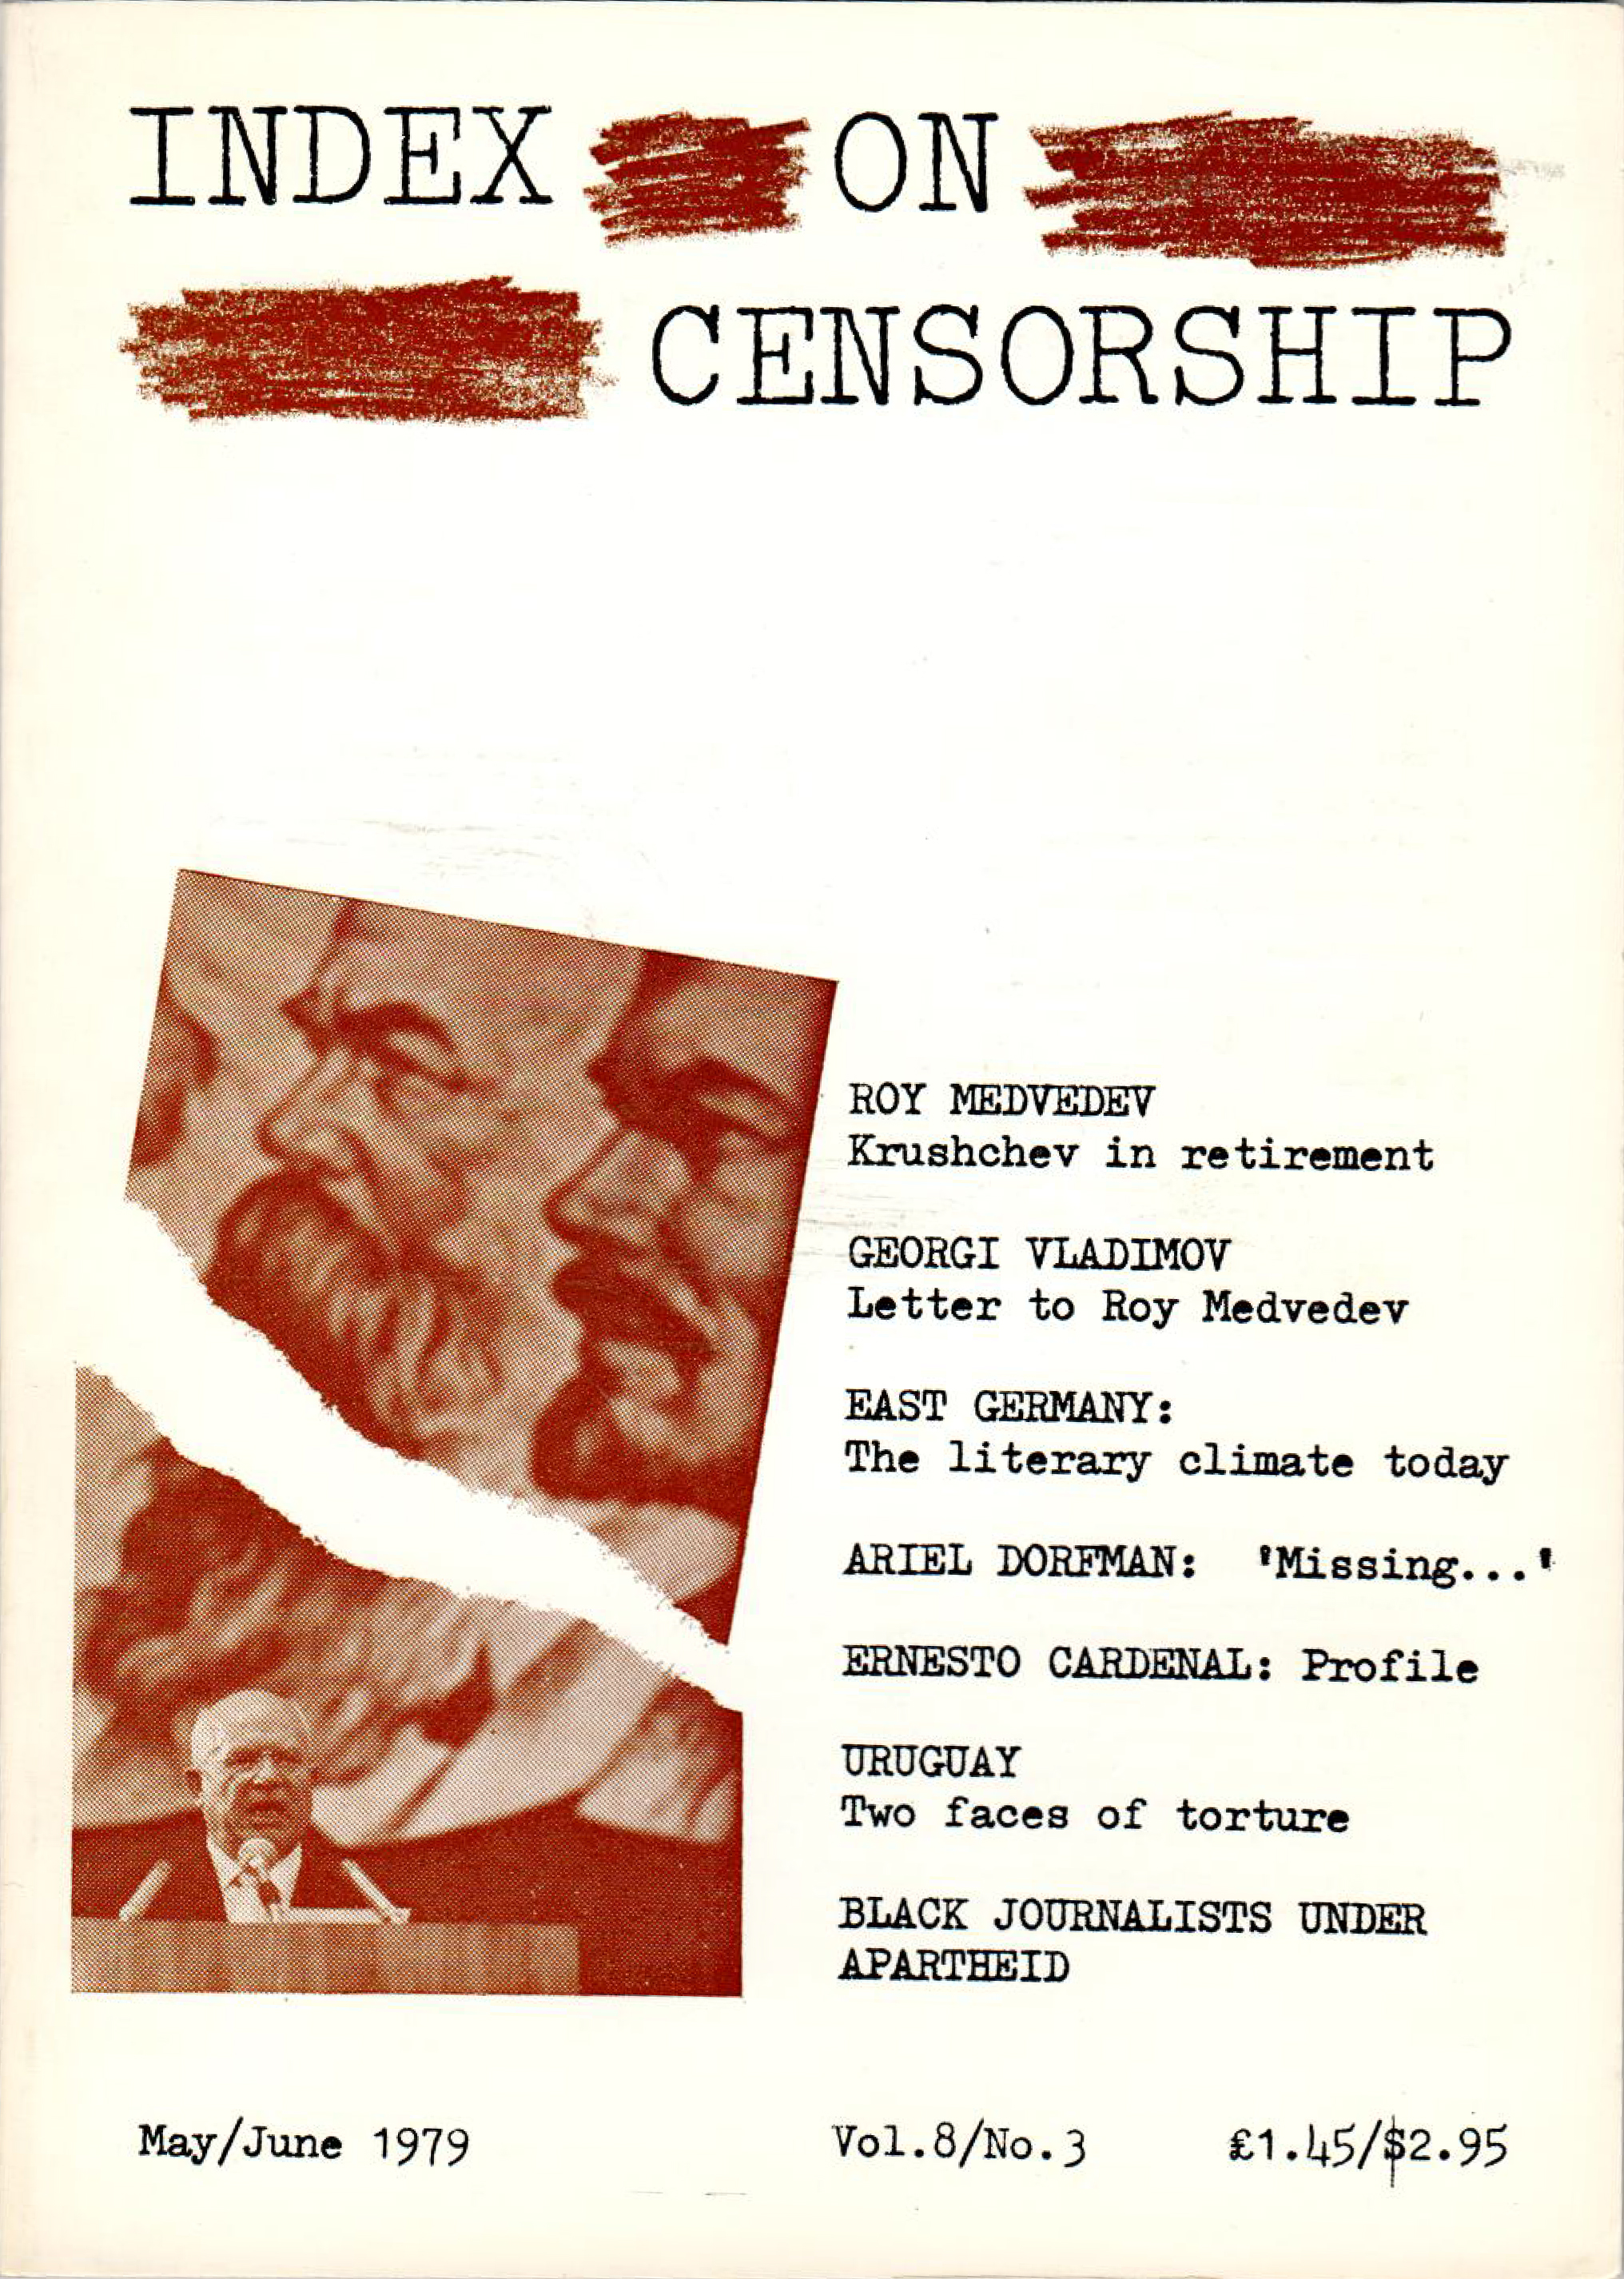 Krushchev in retirement, the May 1979 issue of Index on Censorship magazine